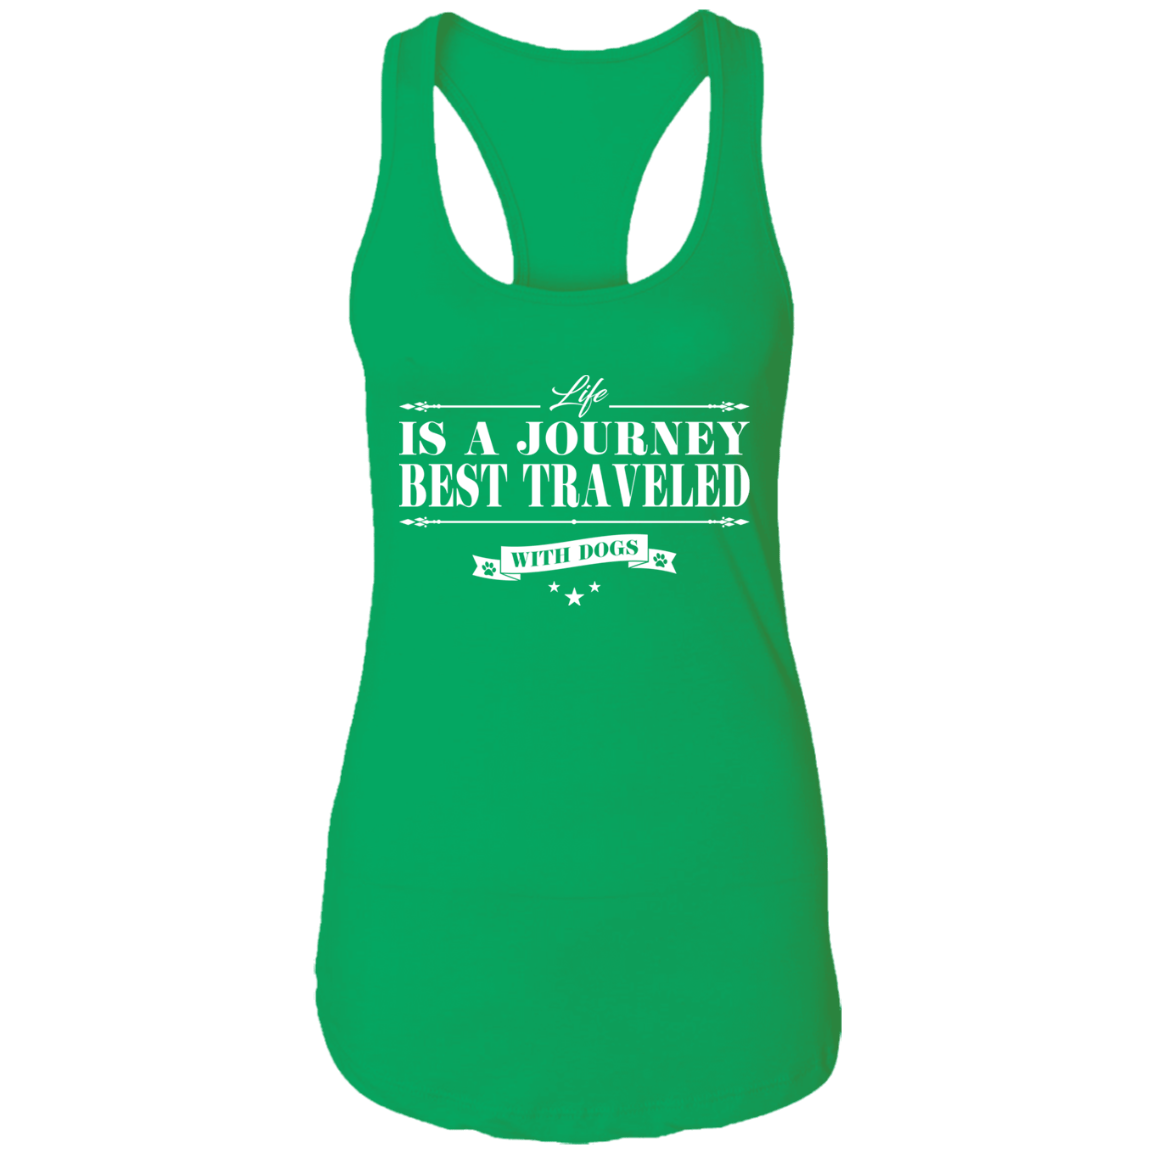 Life Is A Journey Best Travelled With Dogs - Ladies Racer Back Tank.